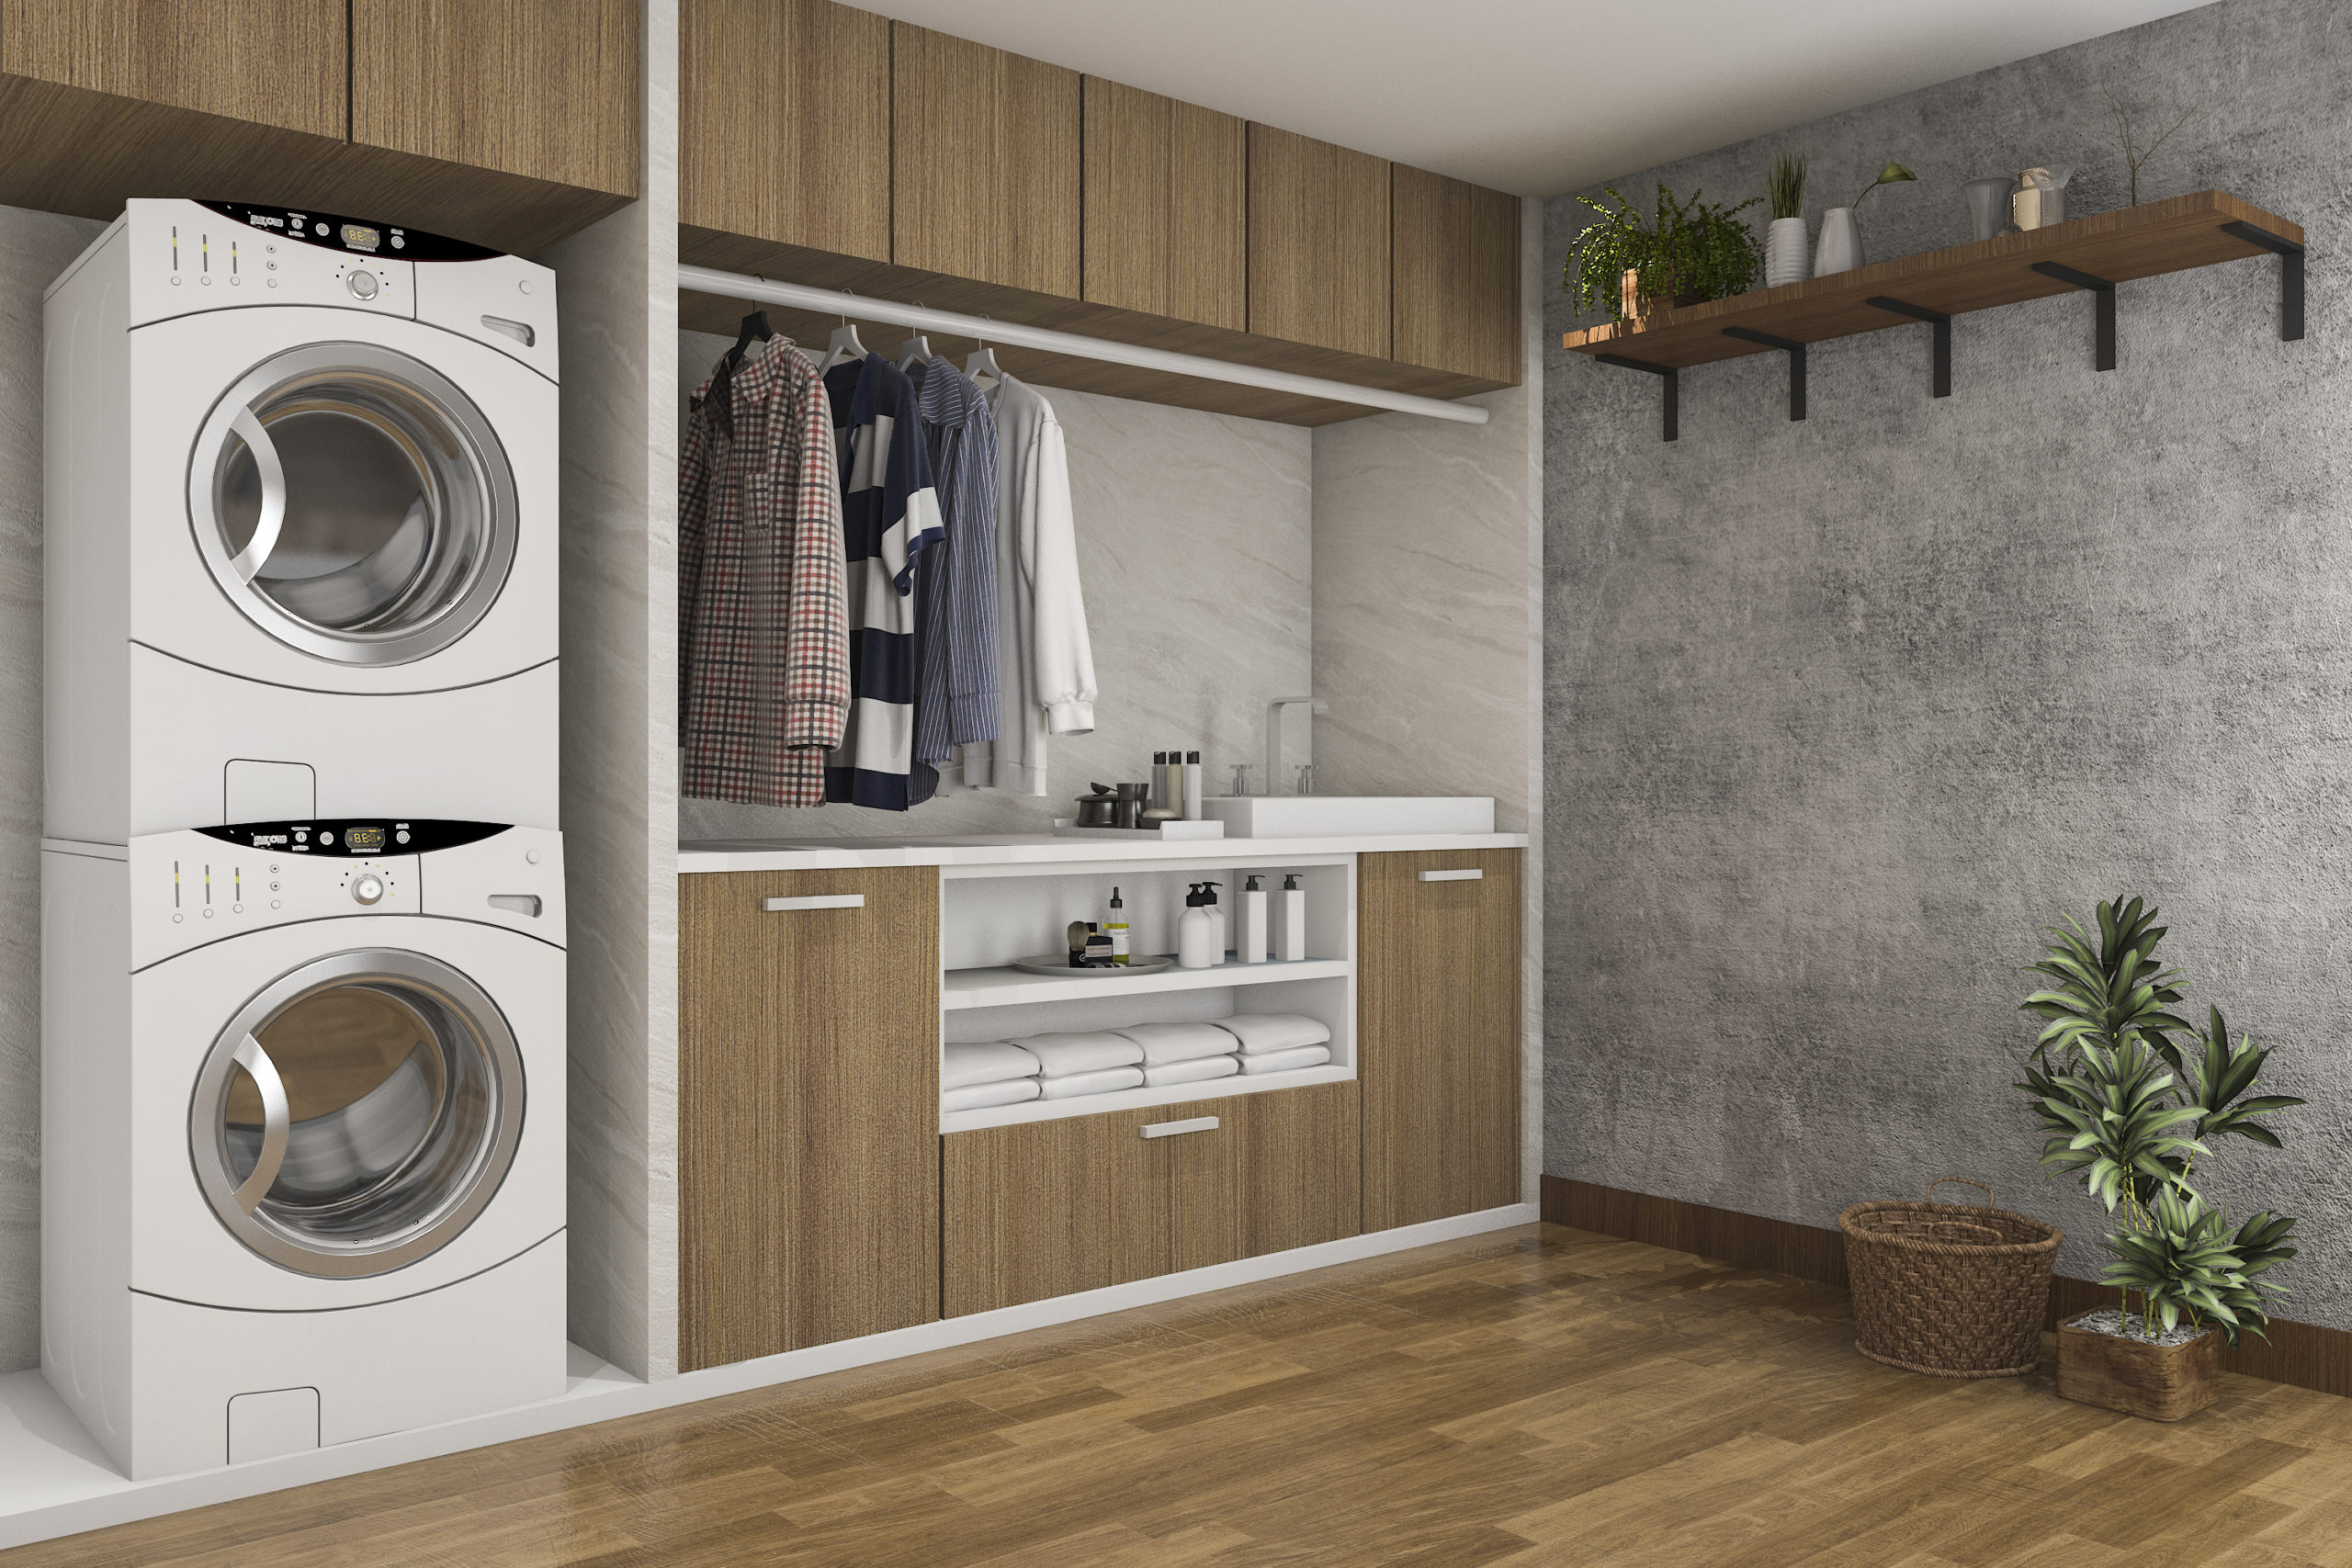 Tips For Small Laundries To Make the Space Feel Bigger